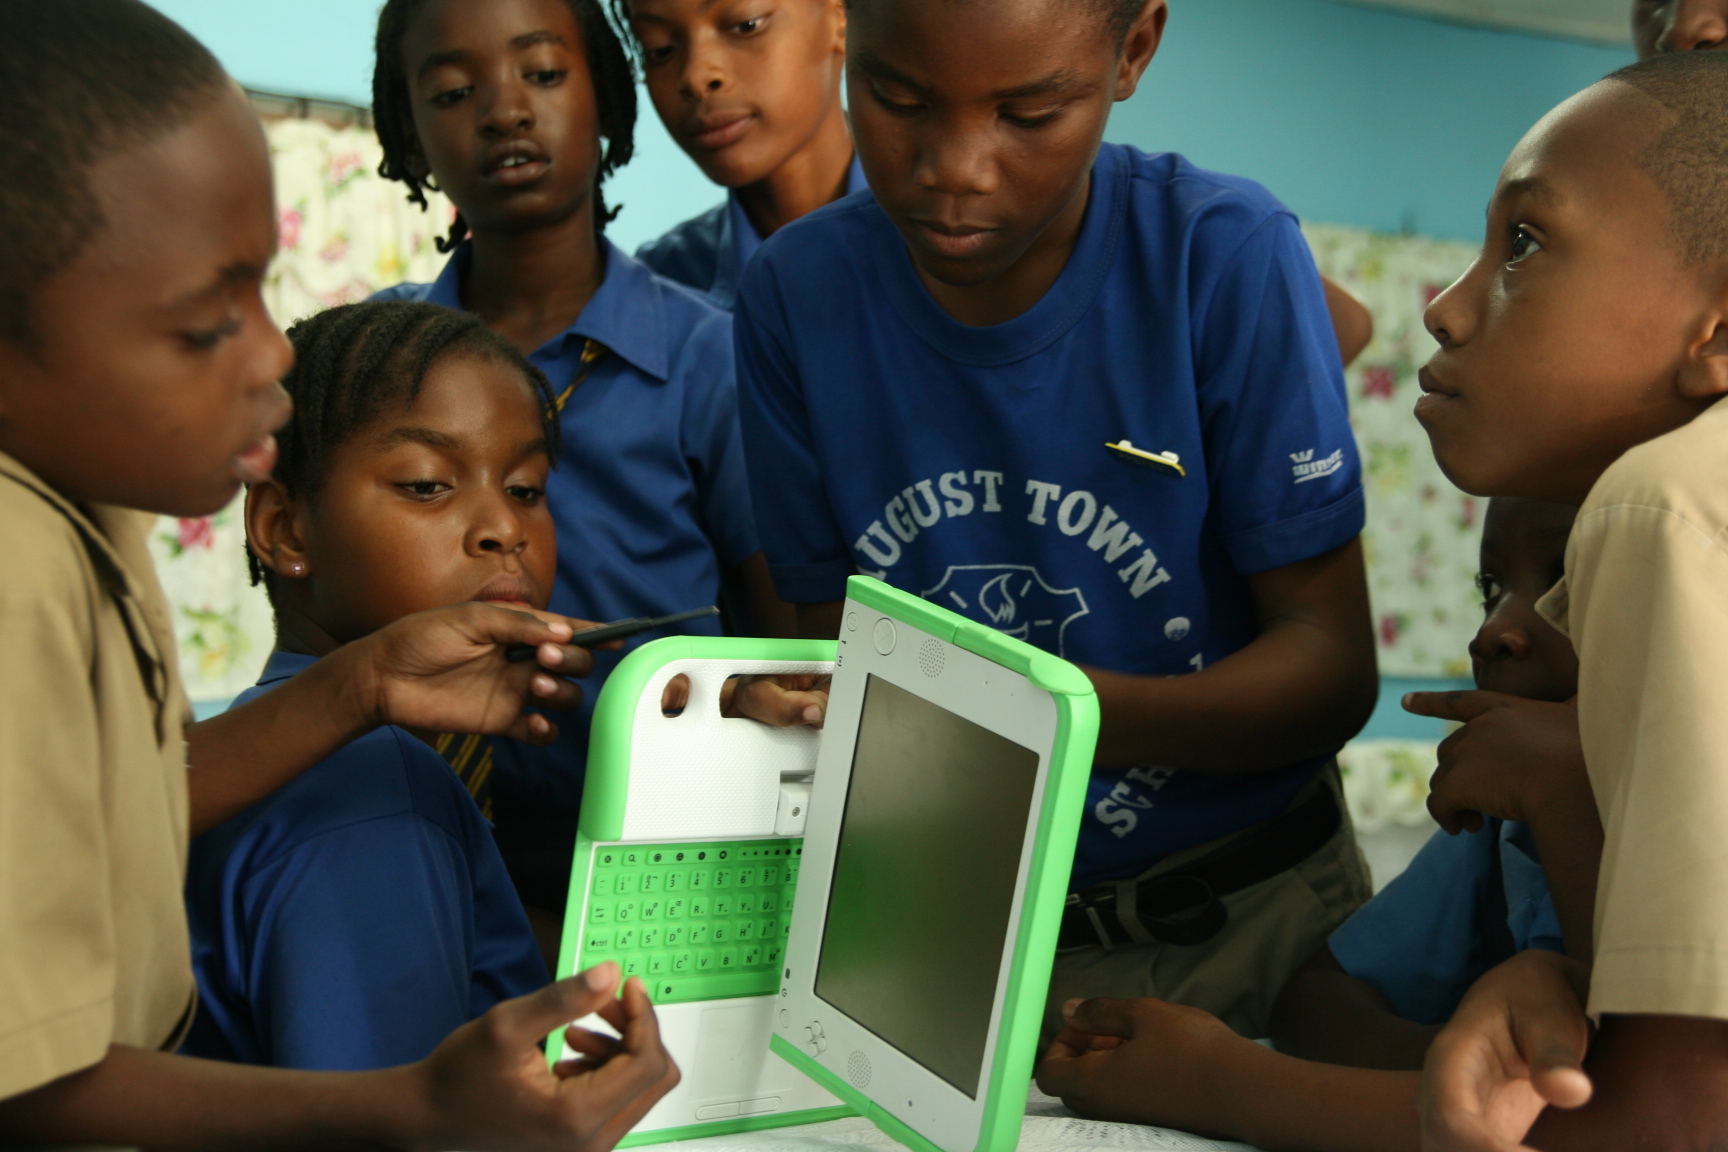 group of children looking at green and white electronic device